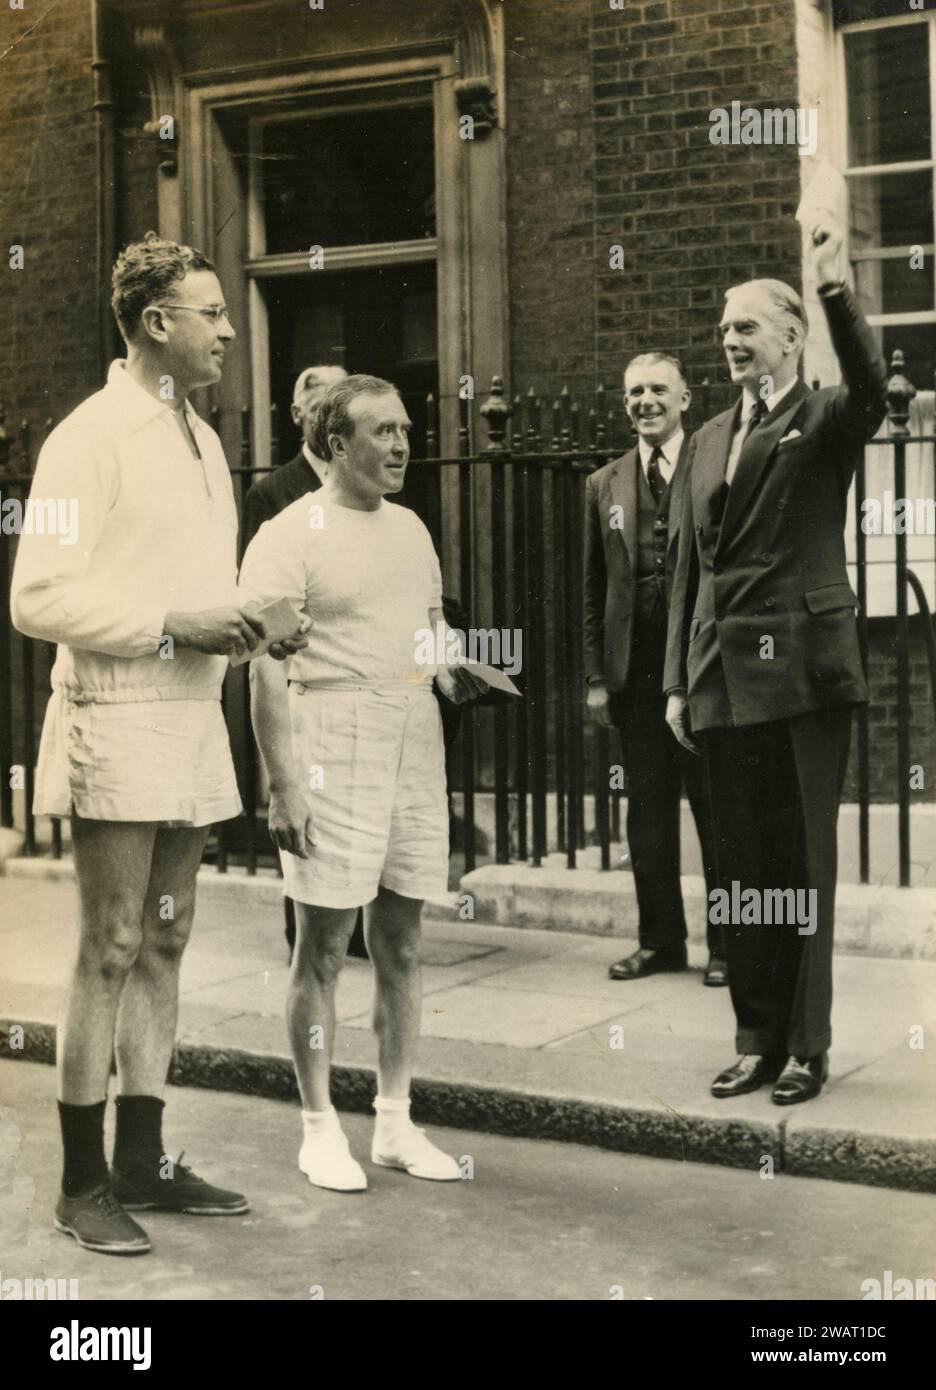 Sir Anthony Eden in Downing Street, Londra, Regno Unito 1950s Foto Stock